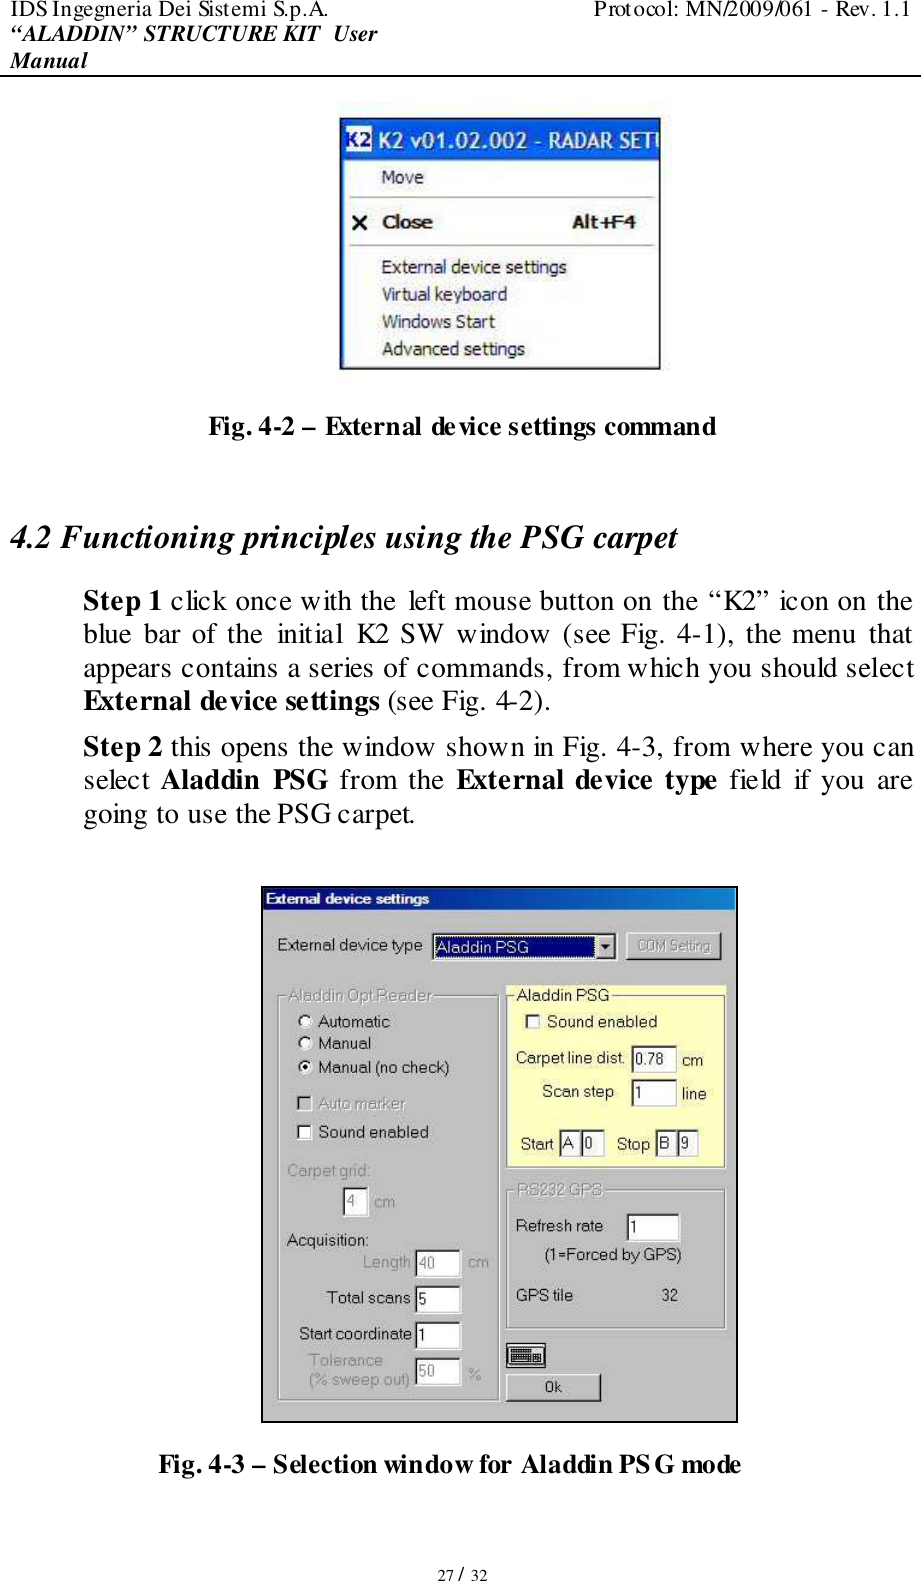 IDS Ingegneria Dei Sistemi S.p.A.  Protocol: MN/2009/061 - Rev. 1.1 “ALADDIN” STRUCTURE KIT  User Manual   27 / 32  Fig. 4-2 – External device settings command  4.2 Functioning principles using the PSG carpet Step 1 click once with the left mouse button on the “K2” icon on the blue bar of the  initial  K2 SW window (see Fig. 4-1), the menu that appears contains a series of commands, from which you should select External device settings (see Fig. 4-2).  Step 2 this opens the window shown in Fig. 4-3, from where you can select Aladdin  PSG from the  External device type field  if you are going to use the PSG carpet.   Fig. 4-3 – Selection window for Aladdin PSG mode  